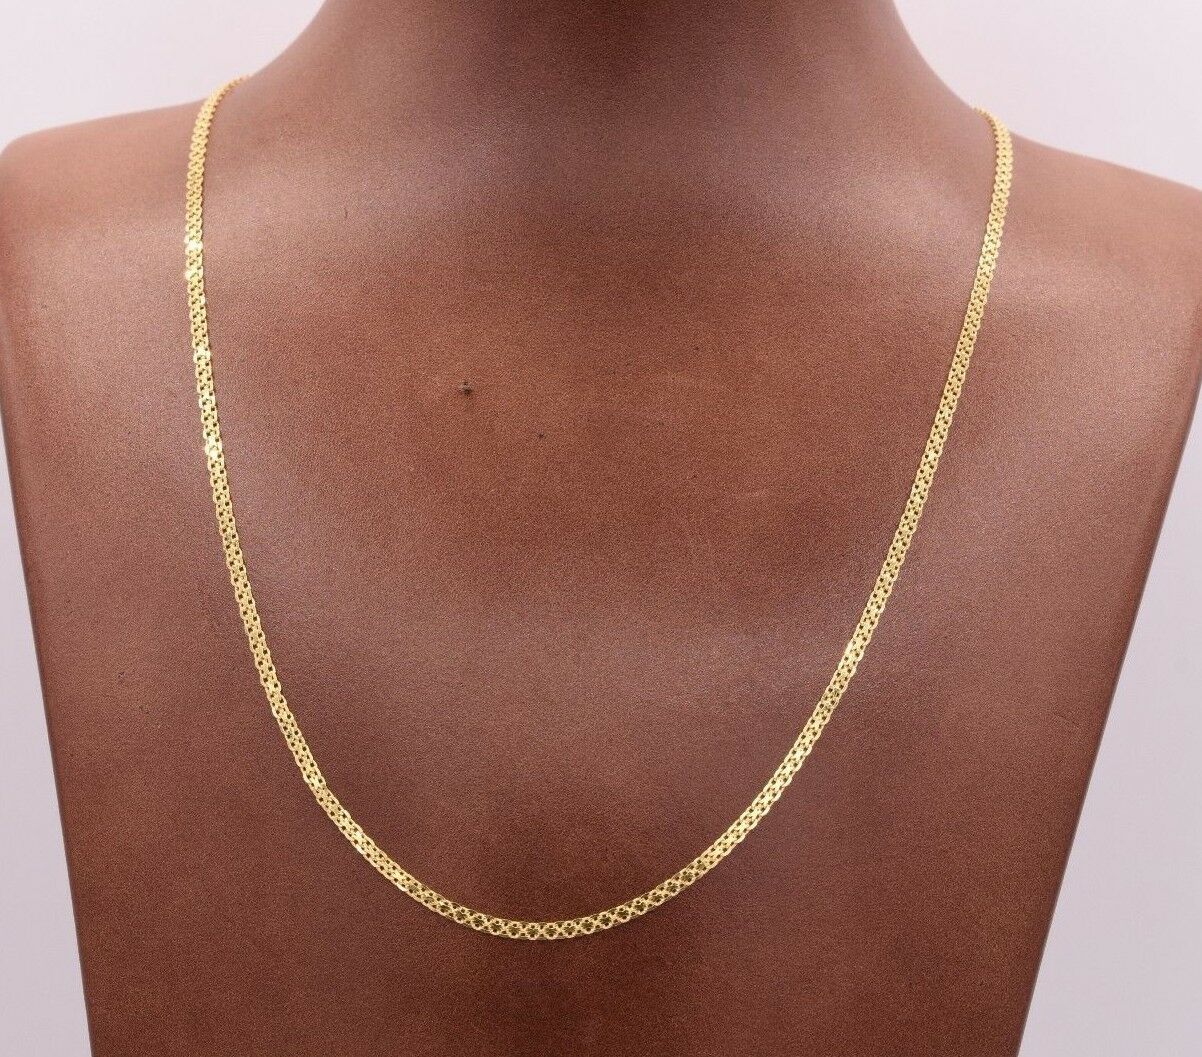 2mm Bismark Bizmark Chain Necklace 14k Yellow Gold Clad Silver 925 Italy